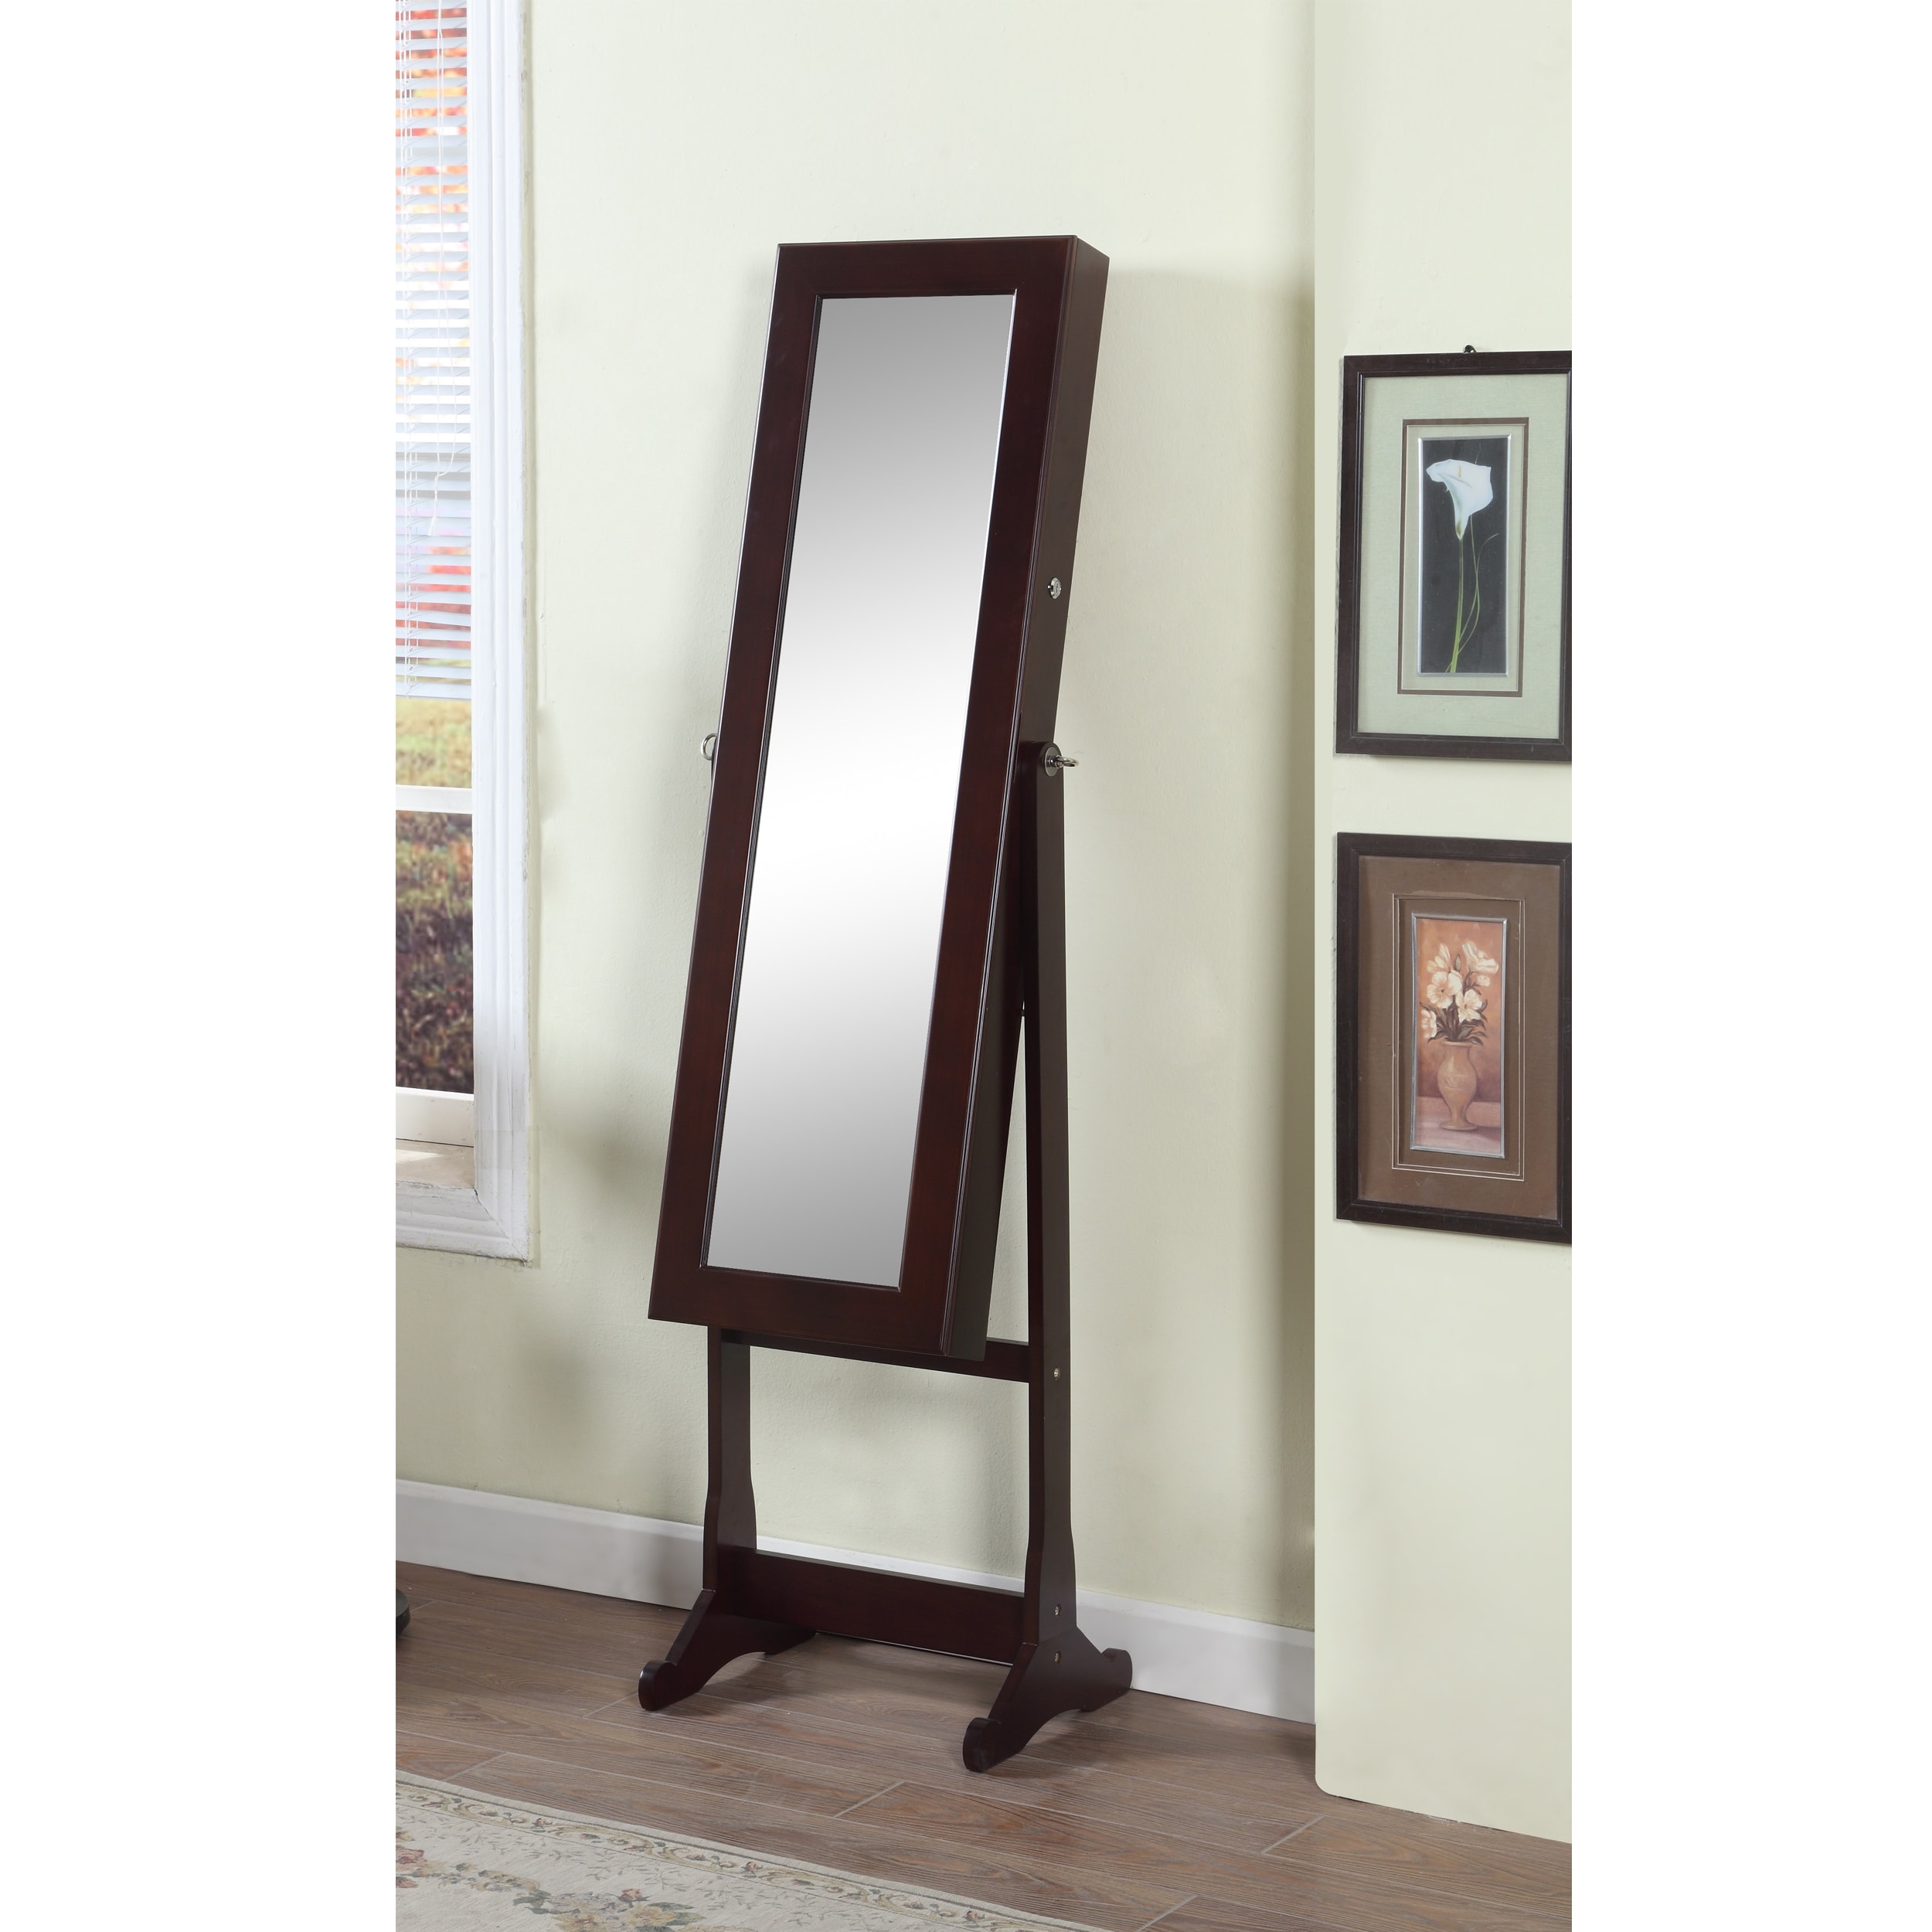 Artiva Usa 63 Inch Walnut Floor Standing Mirror And Jewelry Armoire With Led Light